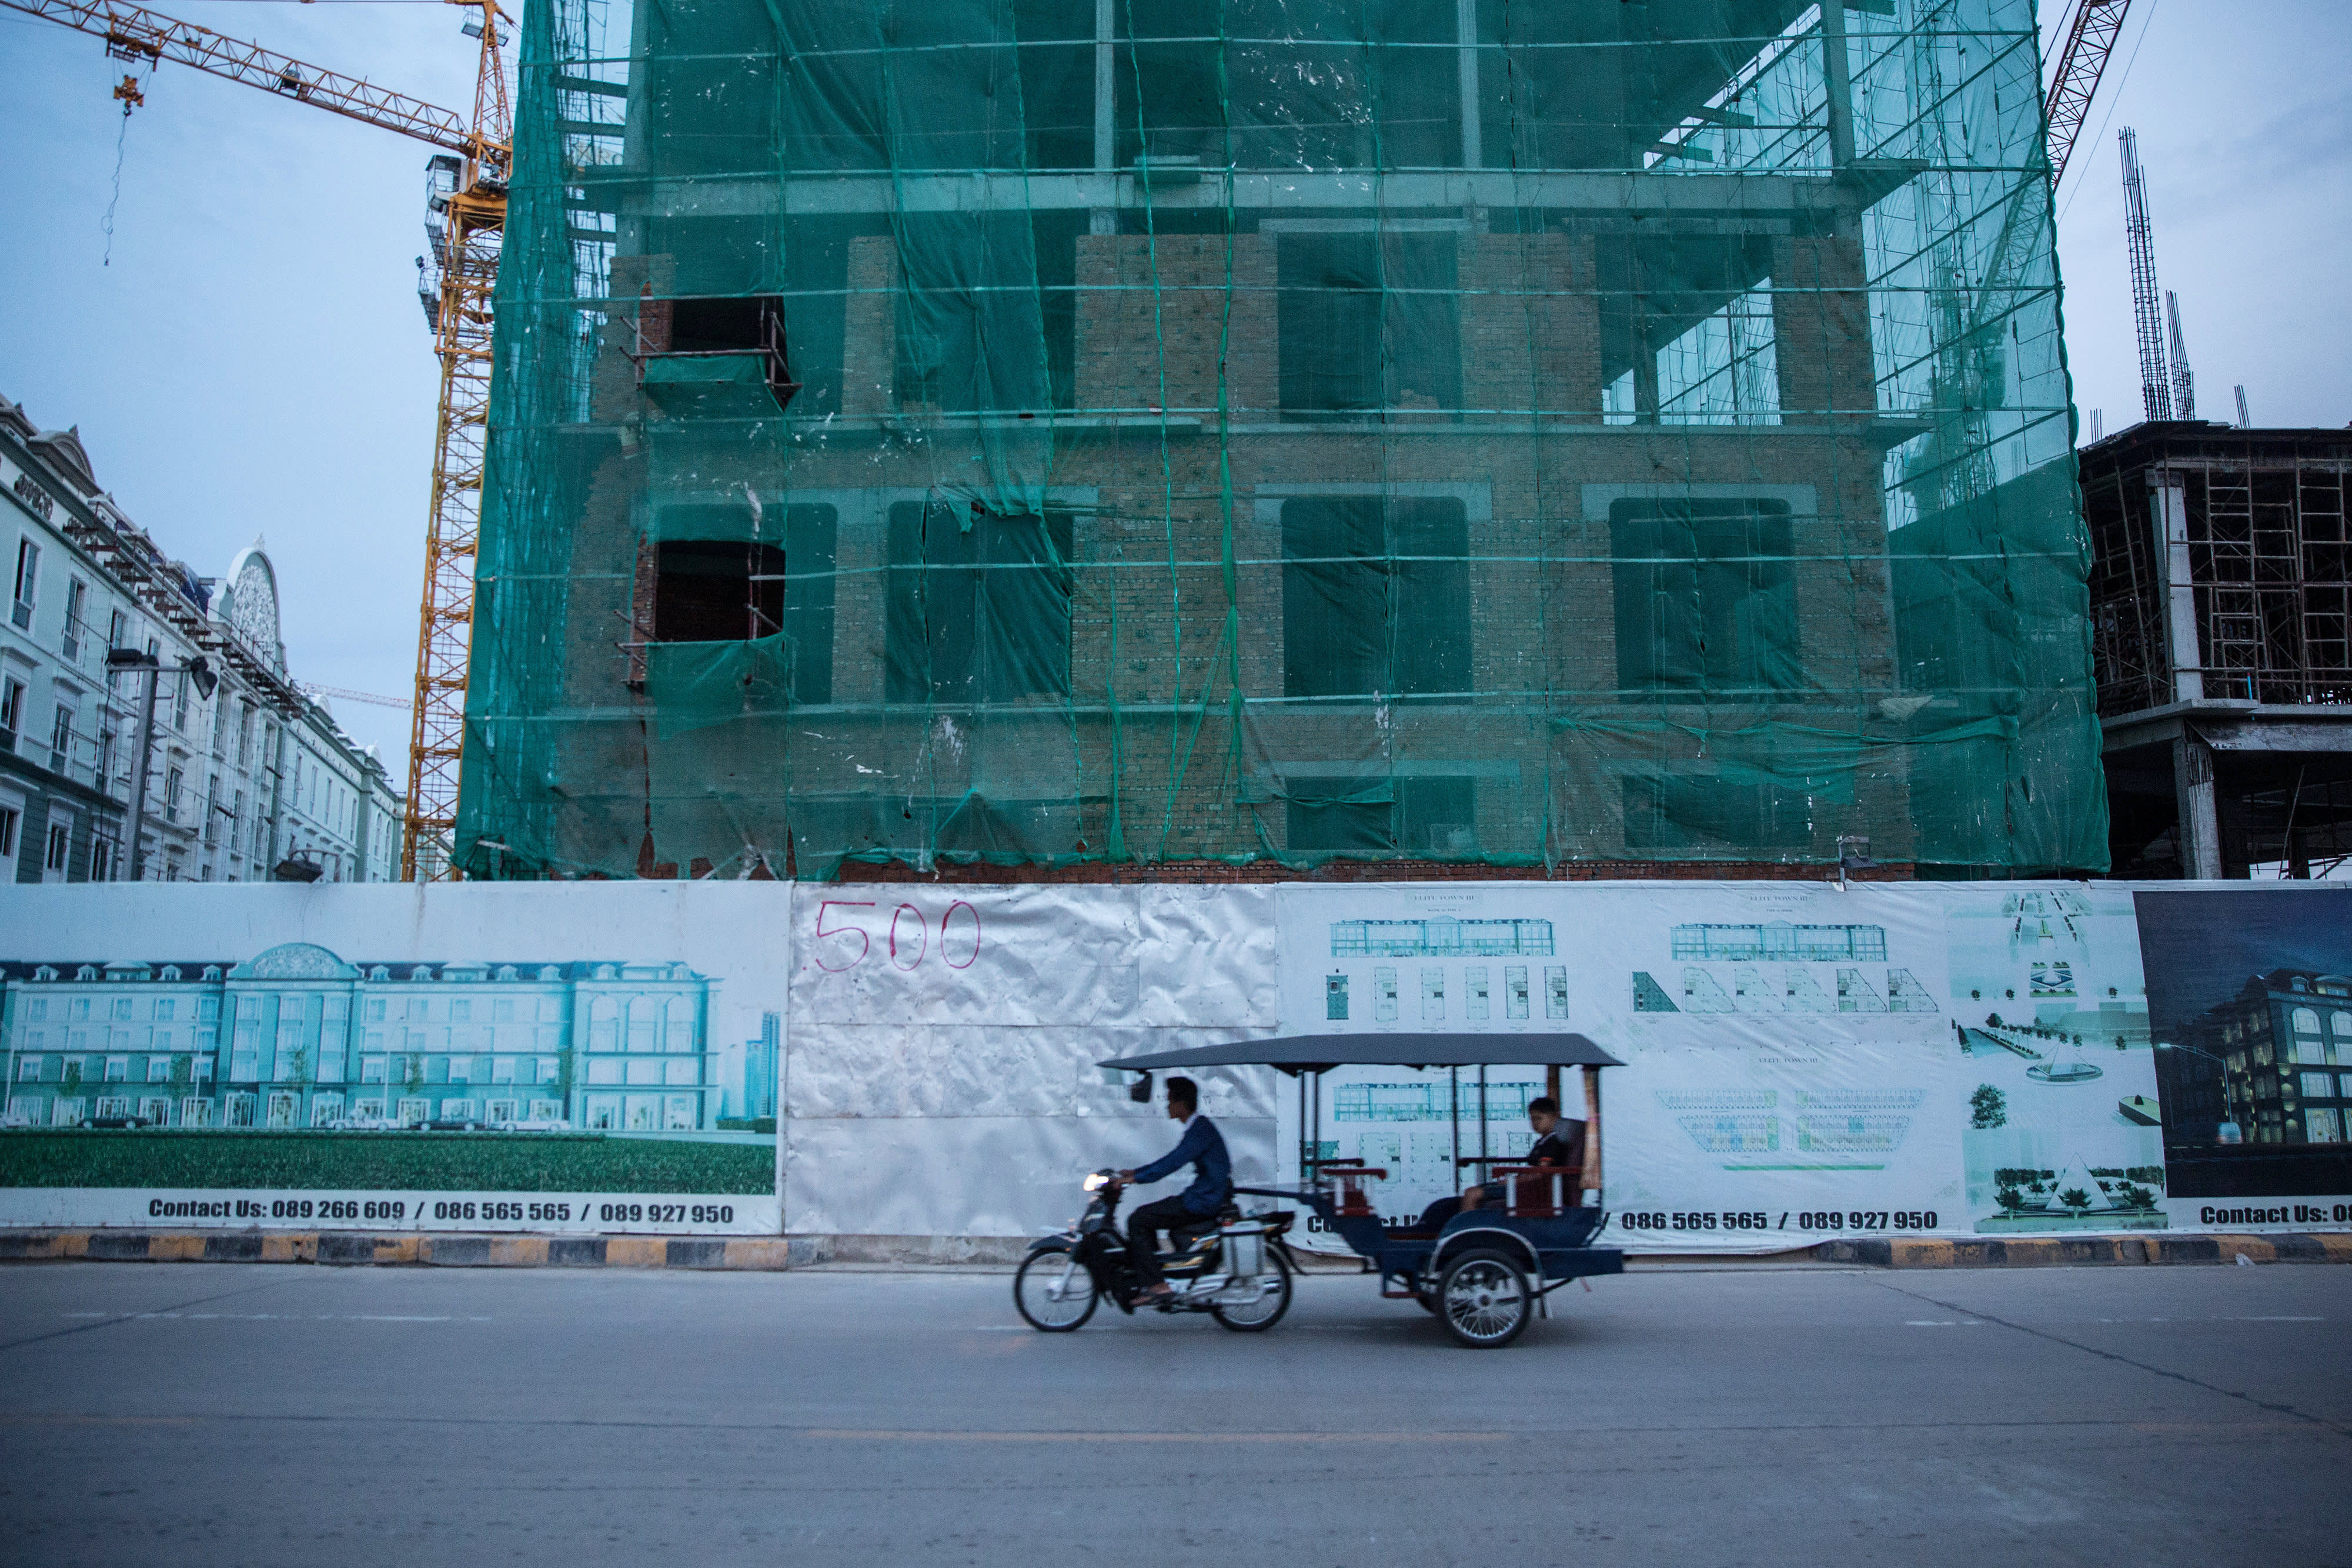 China’s crackdown on housing speculation levels the playing field, major Asian real estate group says